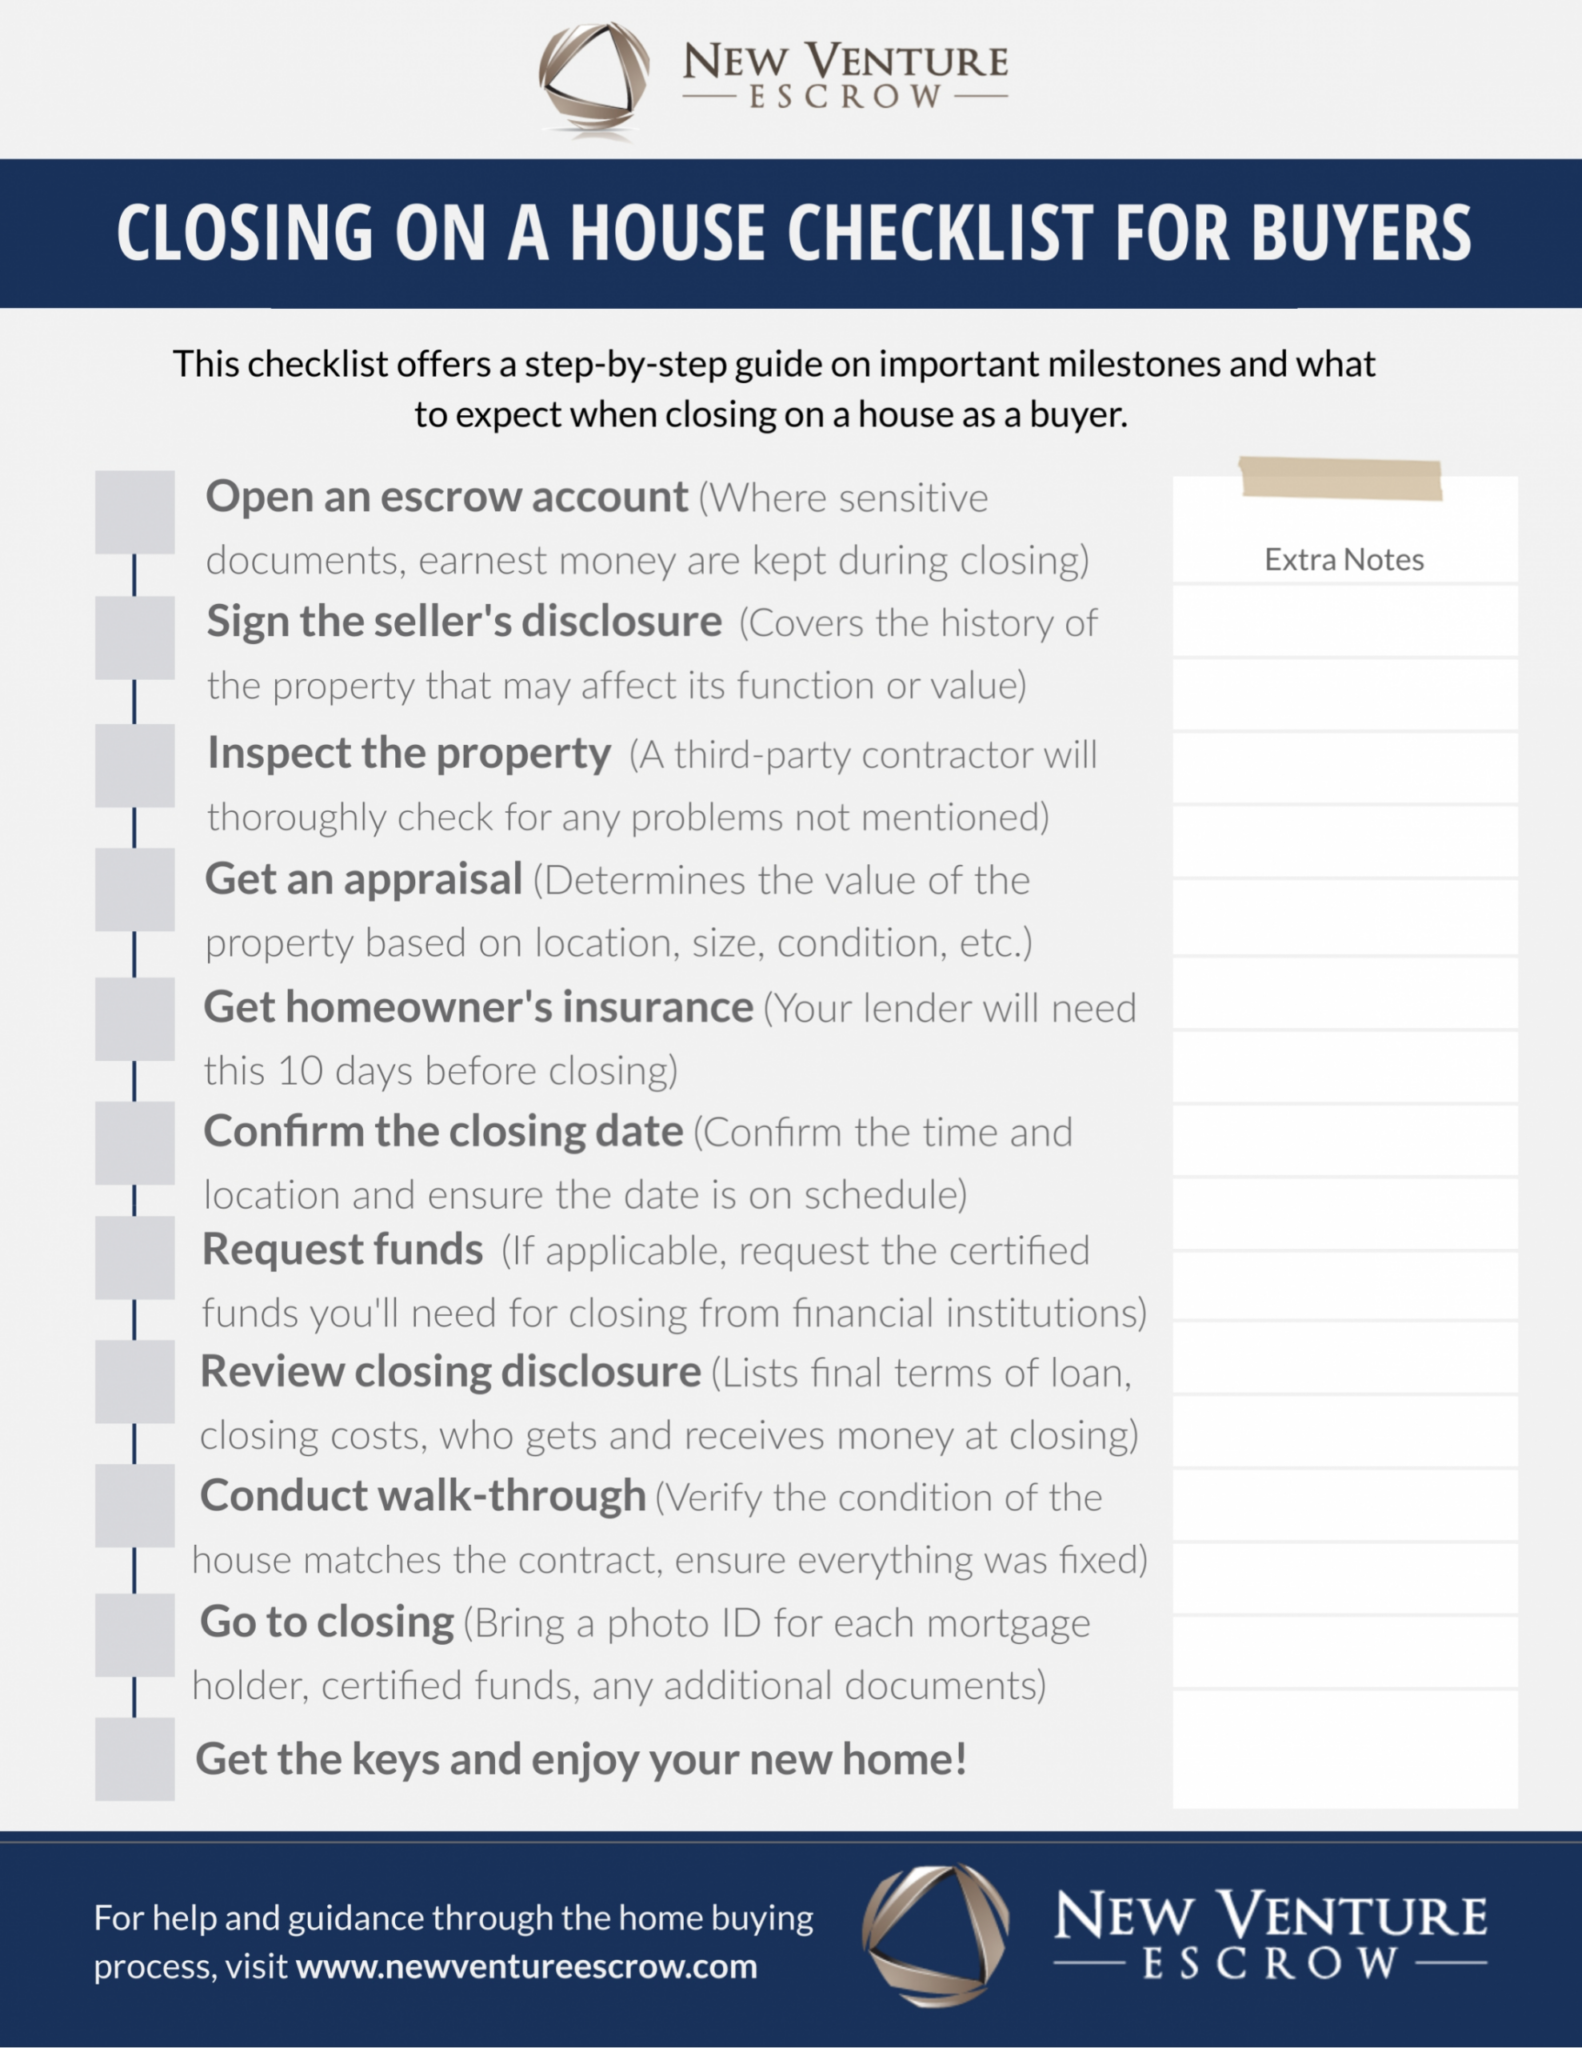 home inspection checklist for buyers